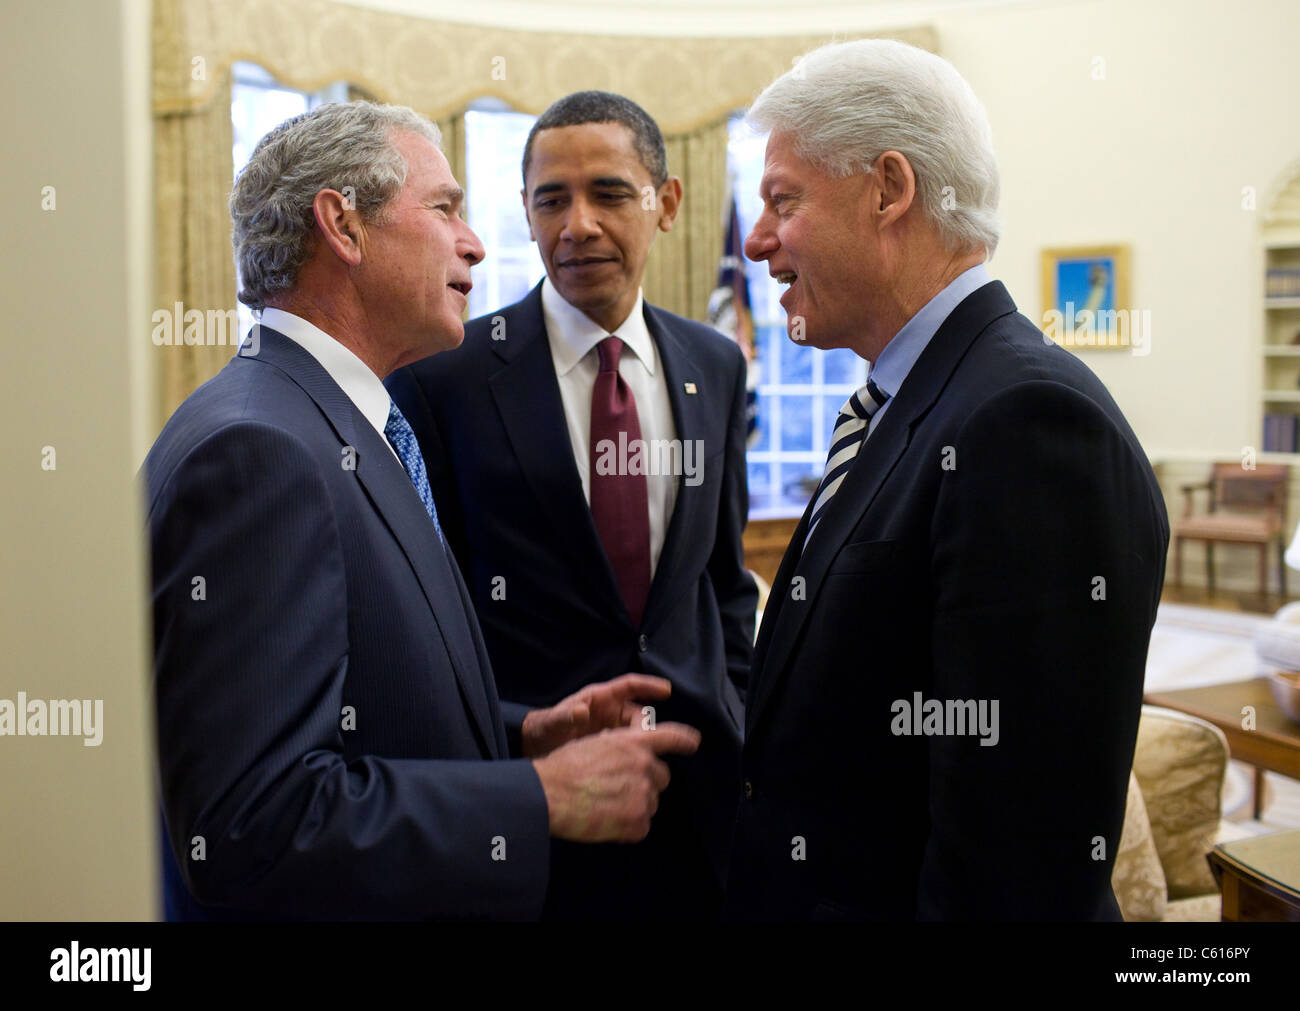 President Obama listens to a conversation between former Presidents Bill Clinton and George W. Bush after recruiting them to help earthquake stricken Haiti. Jan. 16 2010. (BSWH 2011 8 165) Stock Photo